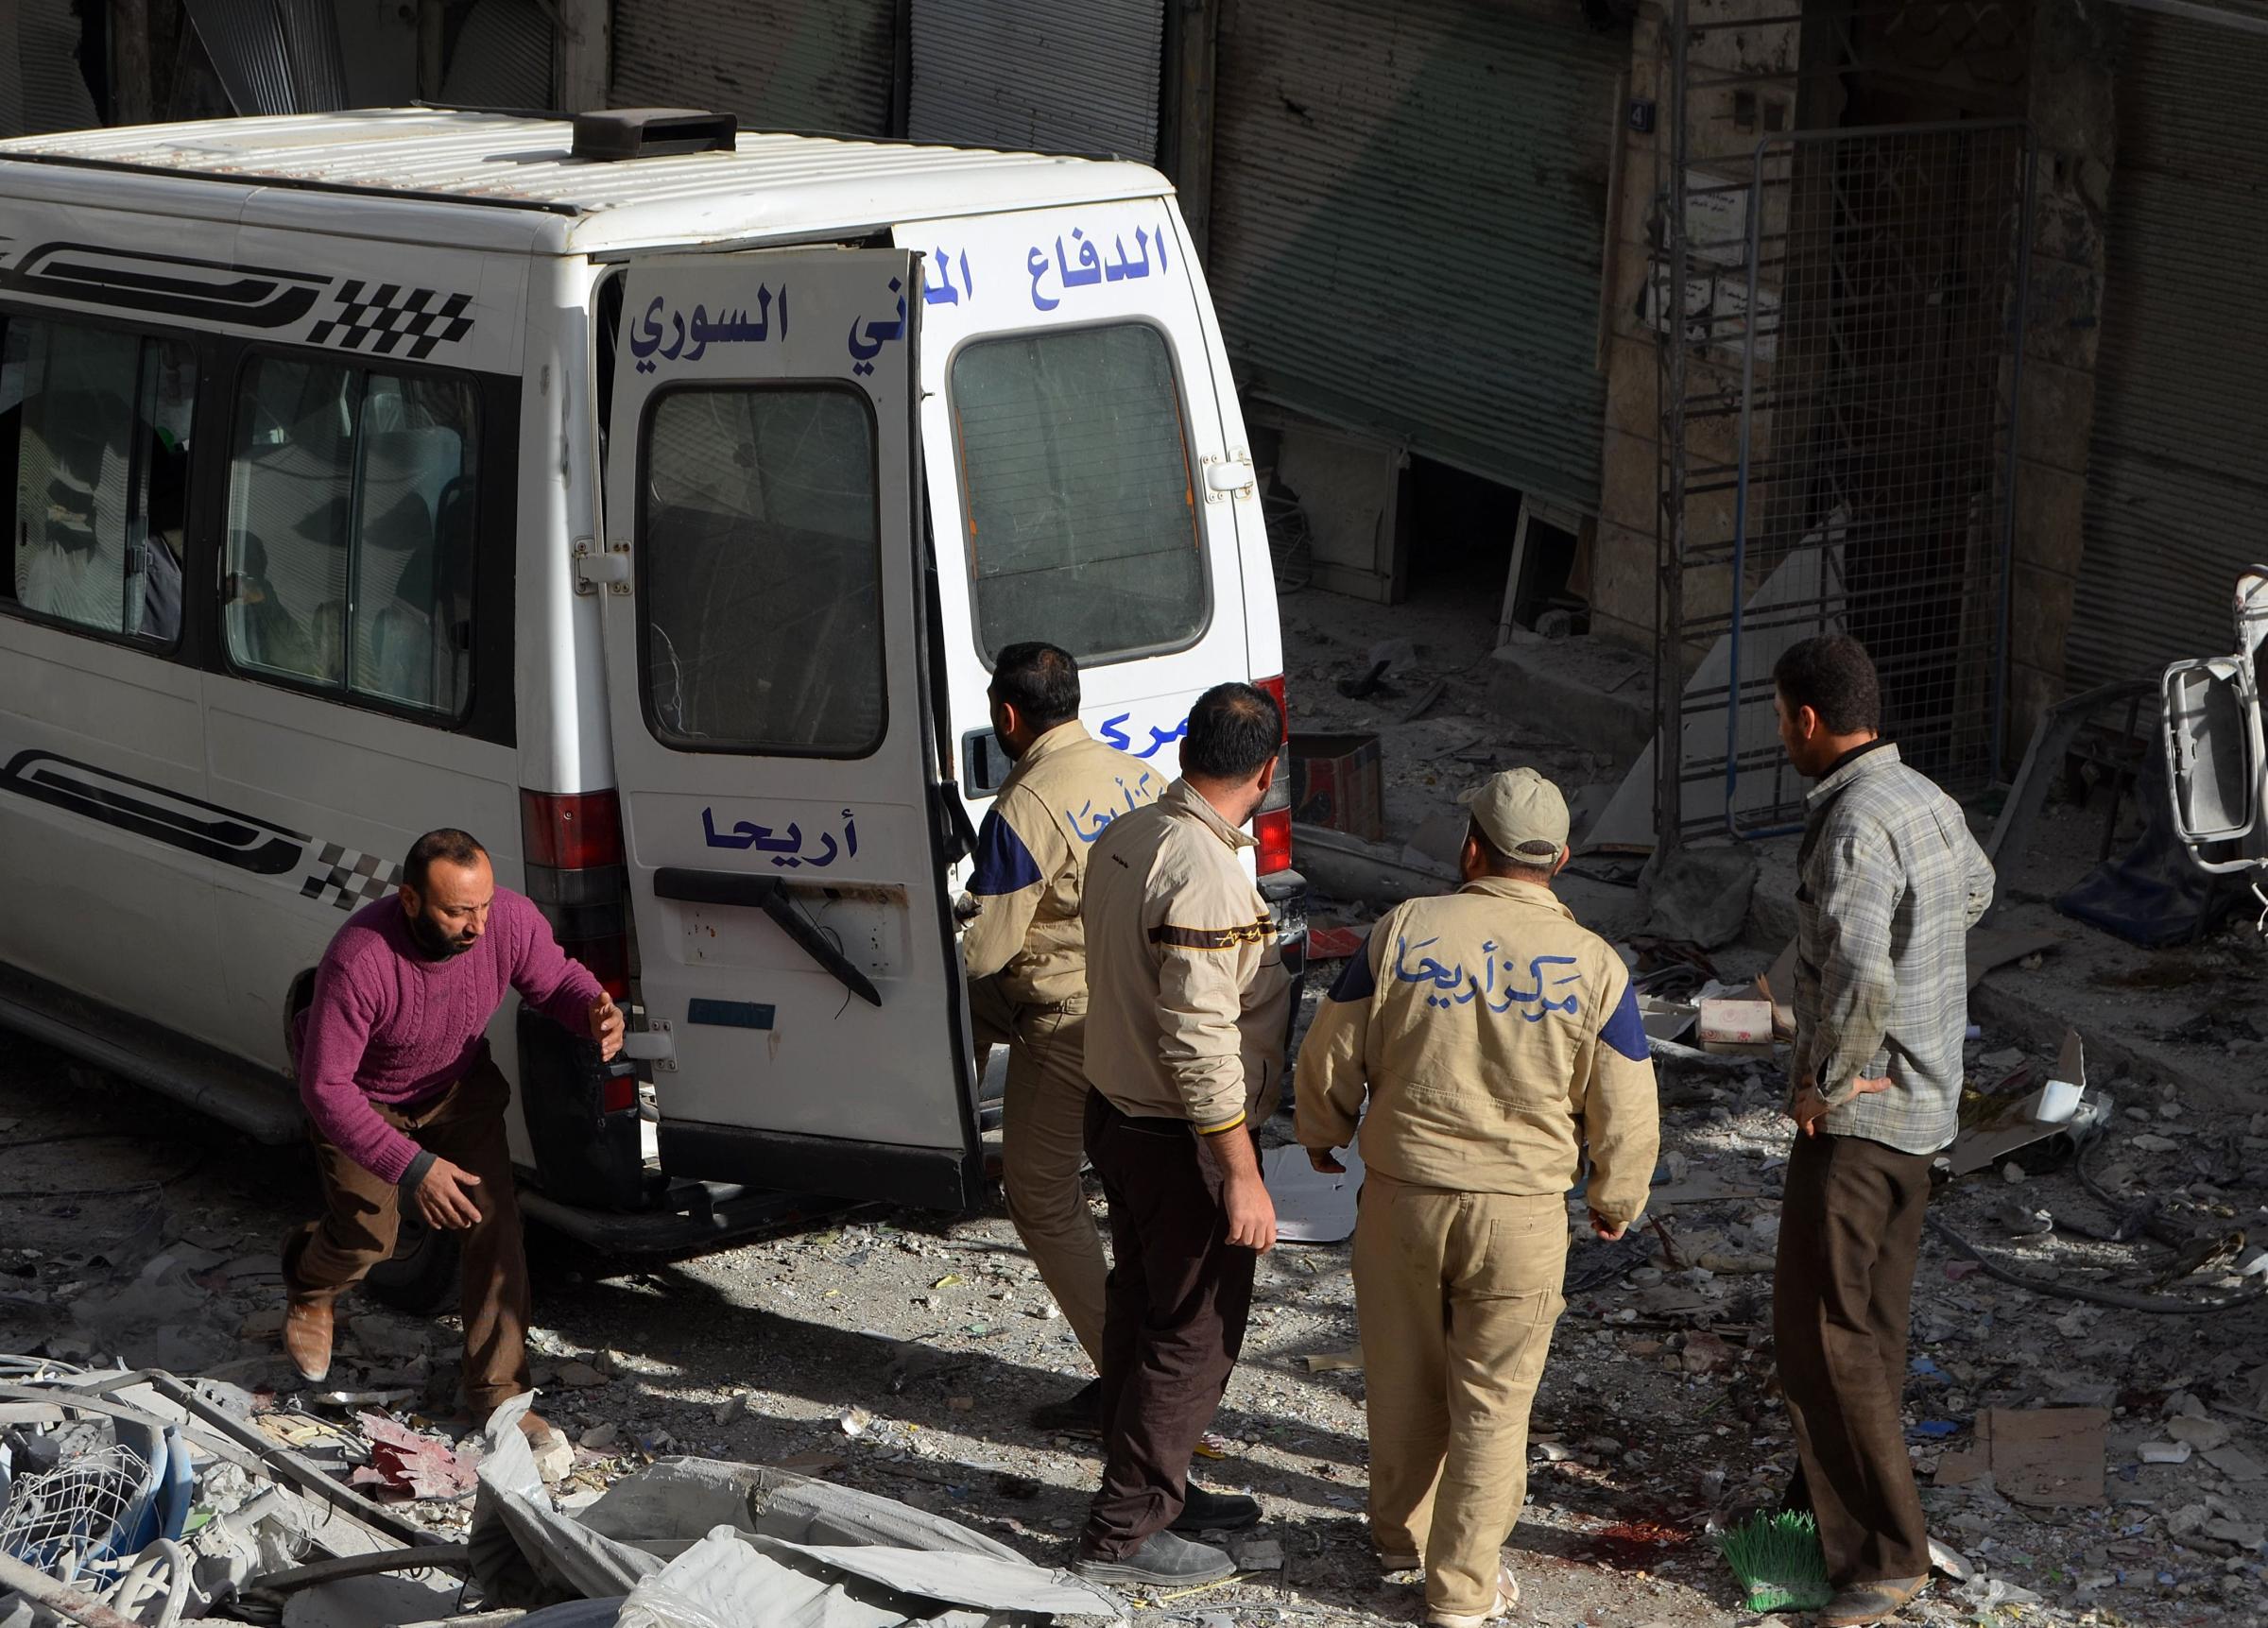 Syrian civil defense members carry a wounded man into an ambulance following the Russian airstrikes targeting a market and residential area in Ariha town Idlib, northern Syria on Nov. 29, 2015.